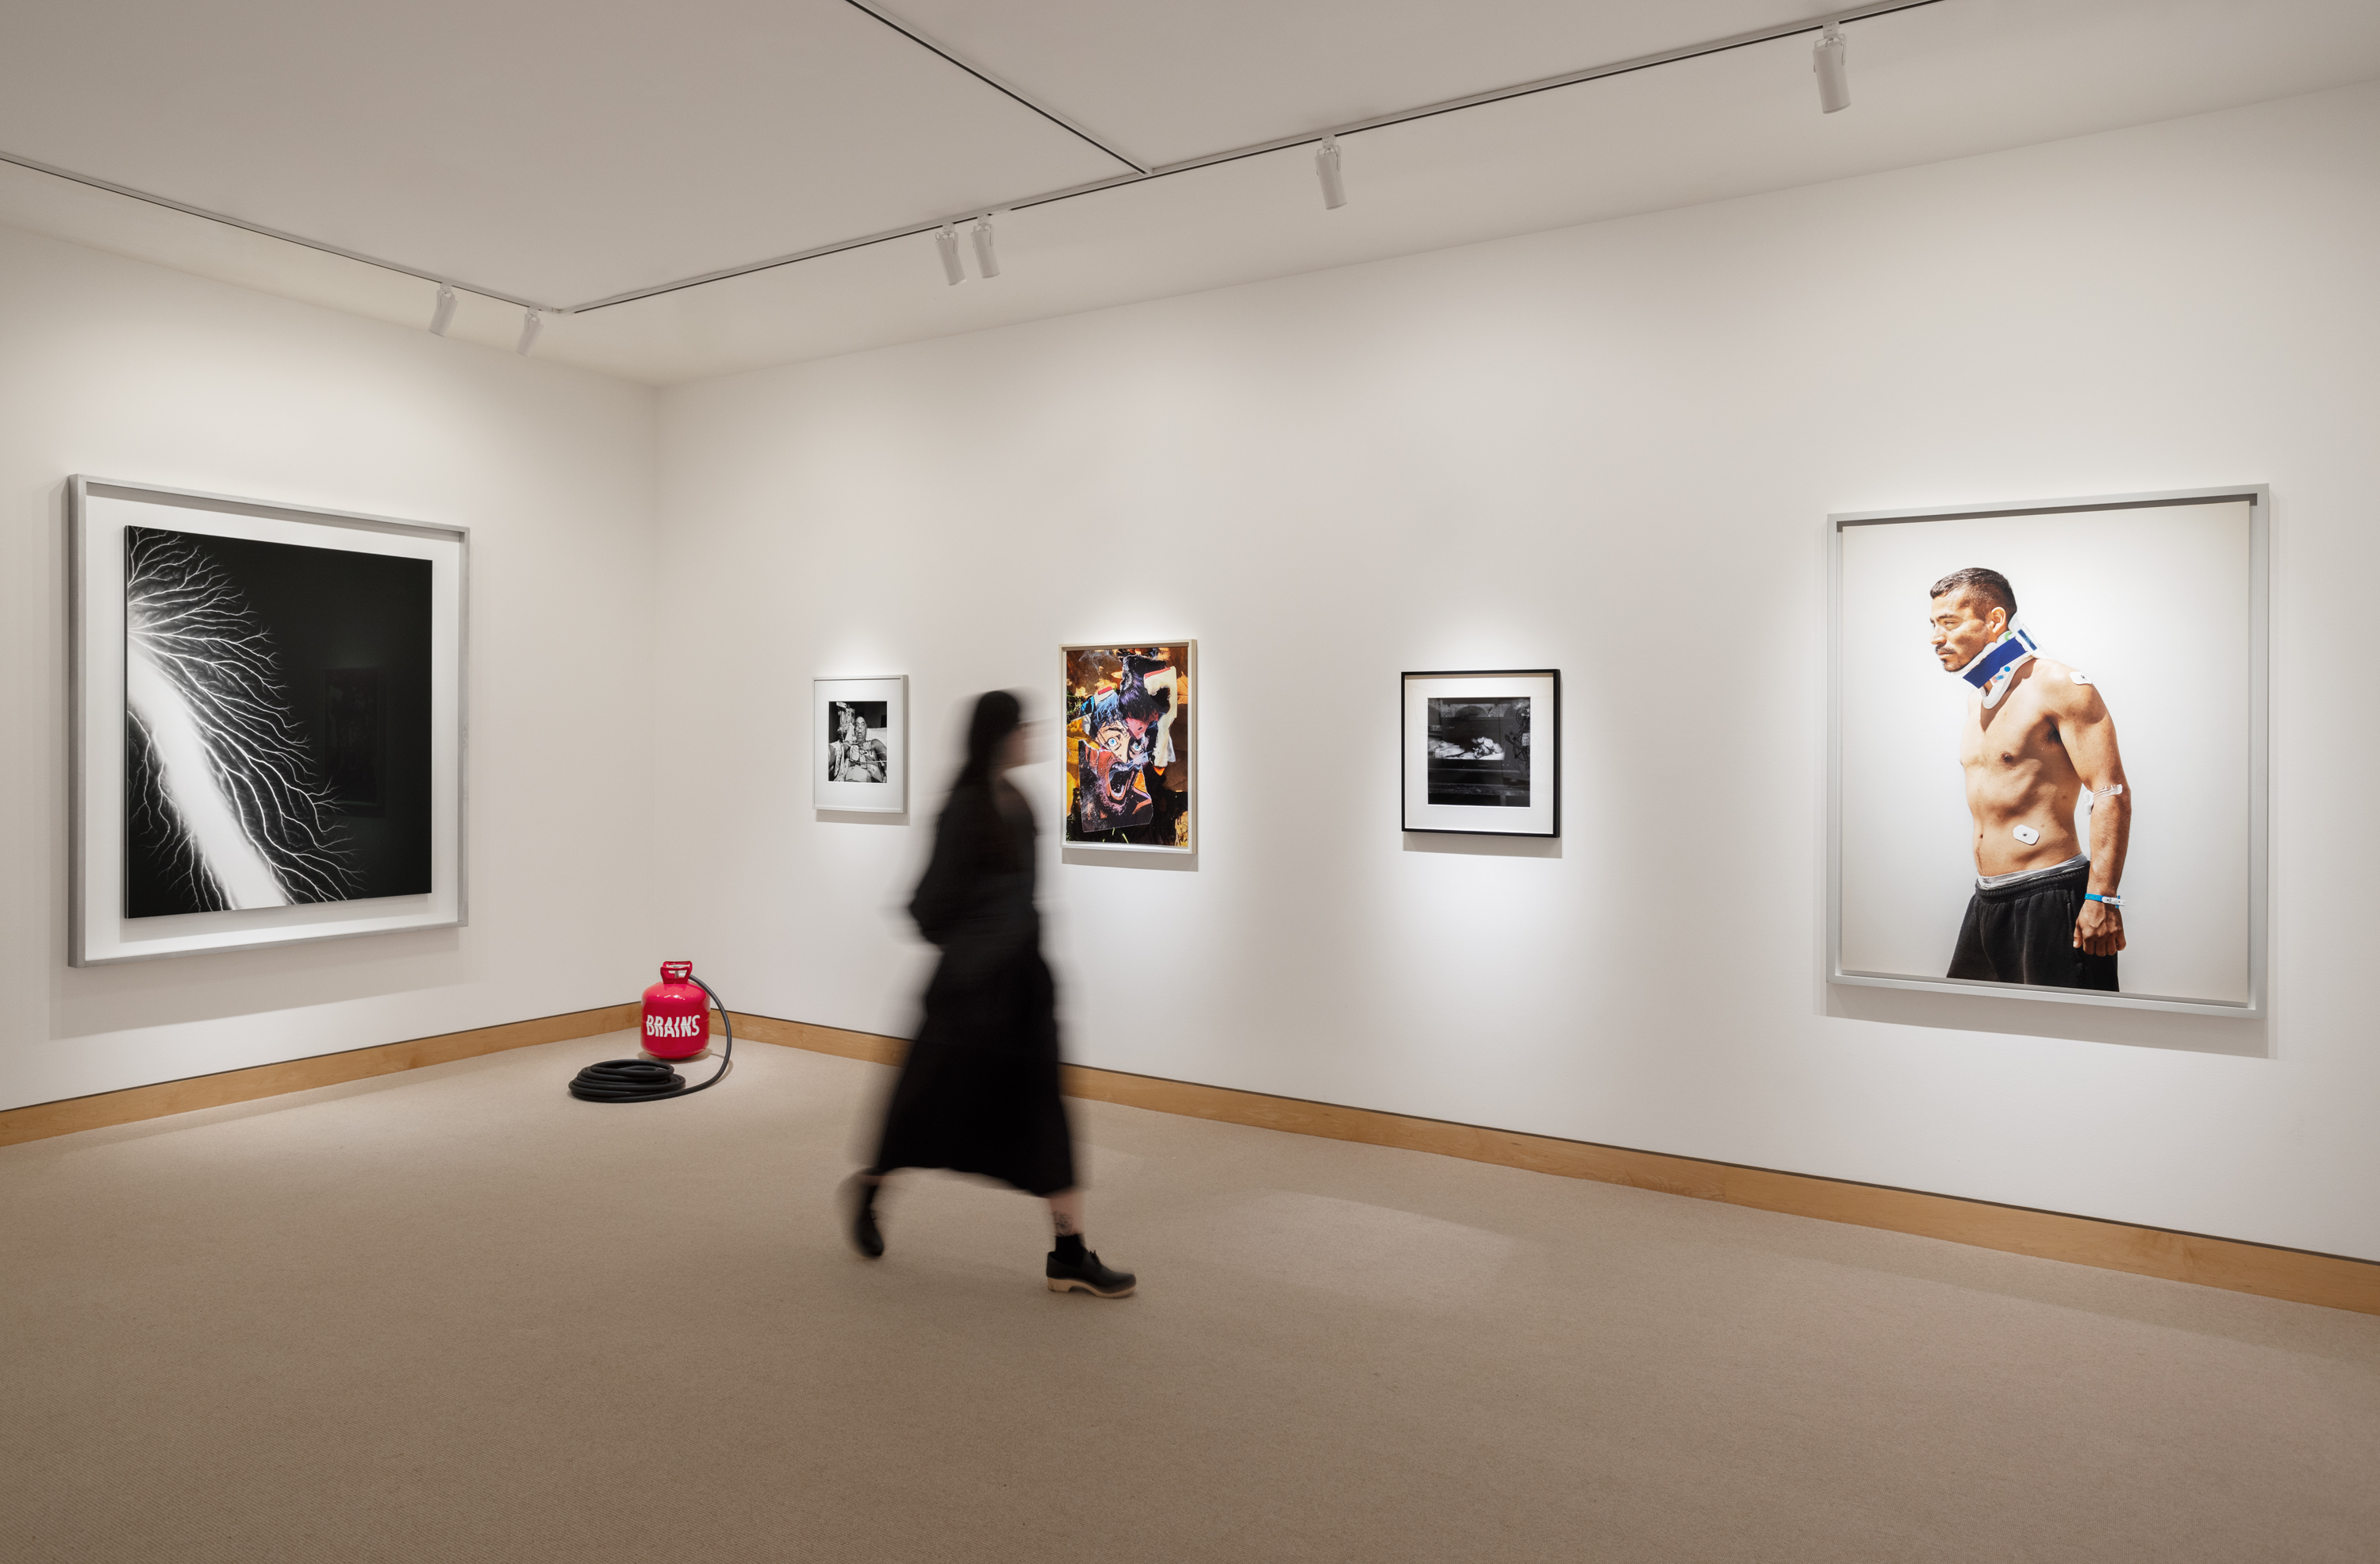 Color image of an exhibition with artworks in a range of different mediums